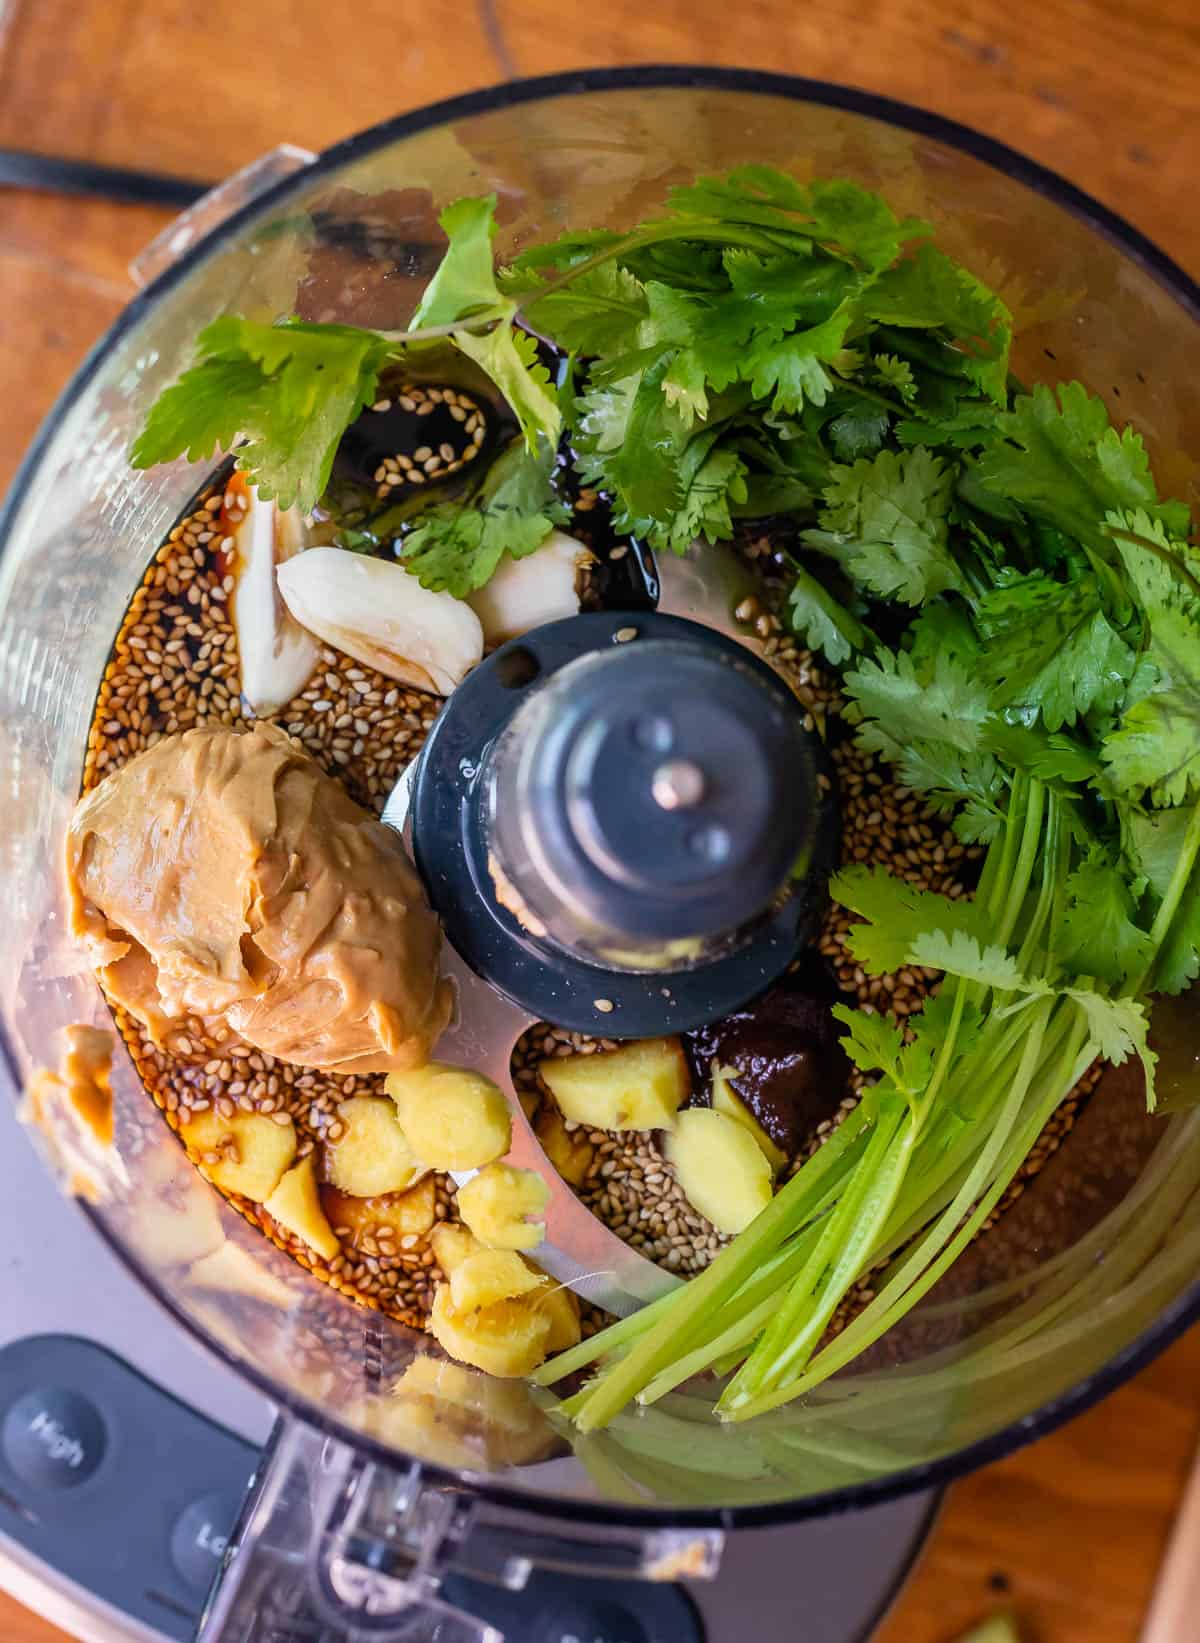 sesame seeds, soy sauce, peanut butter, ginger, and more in food processor to make sesame noodle sauce.